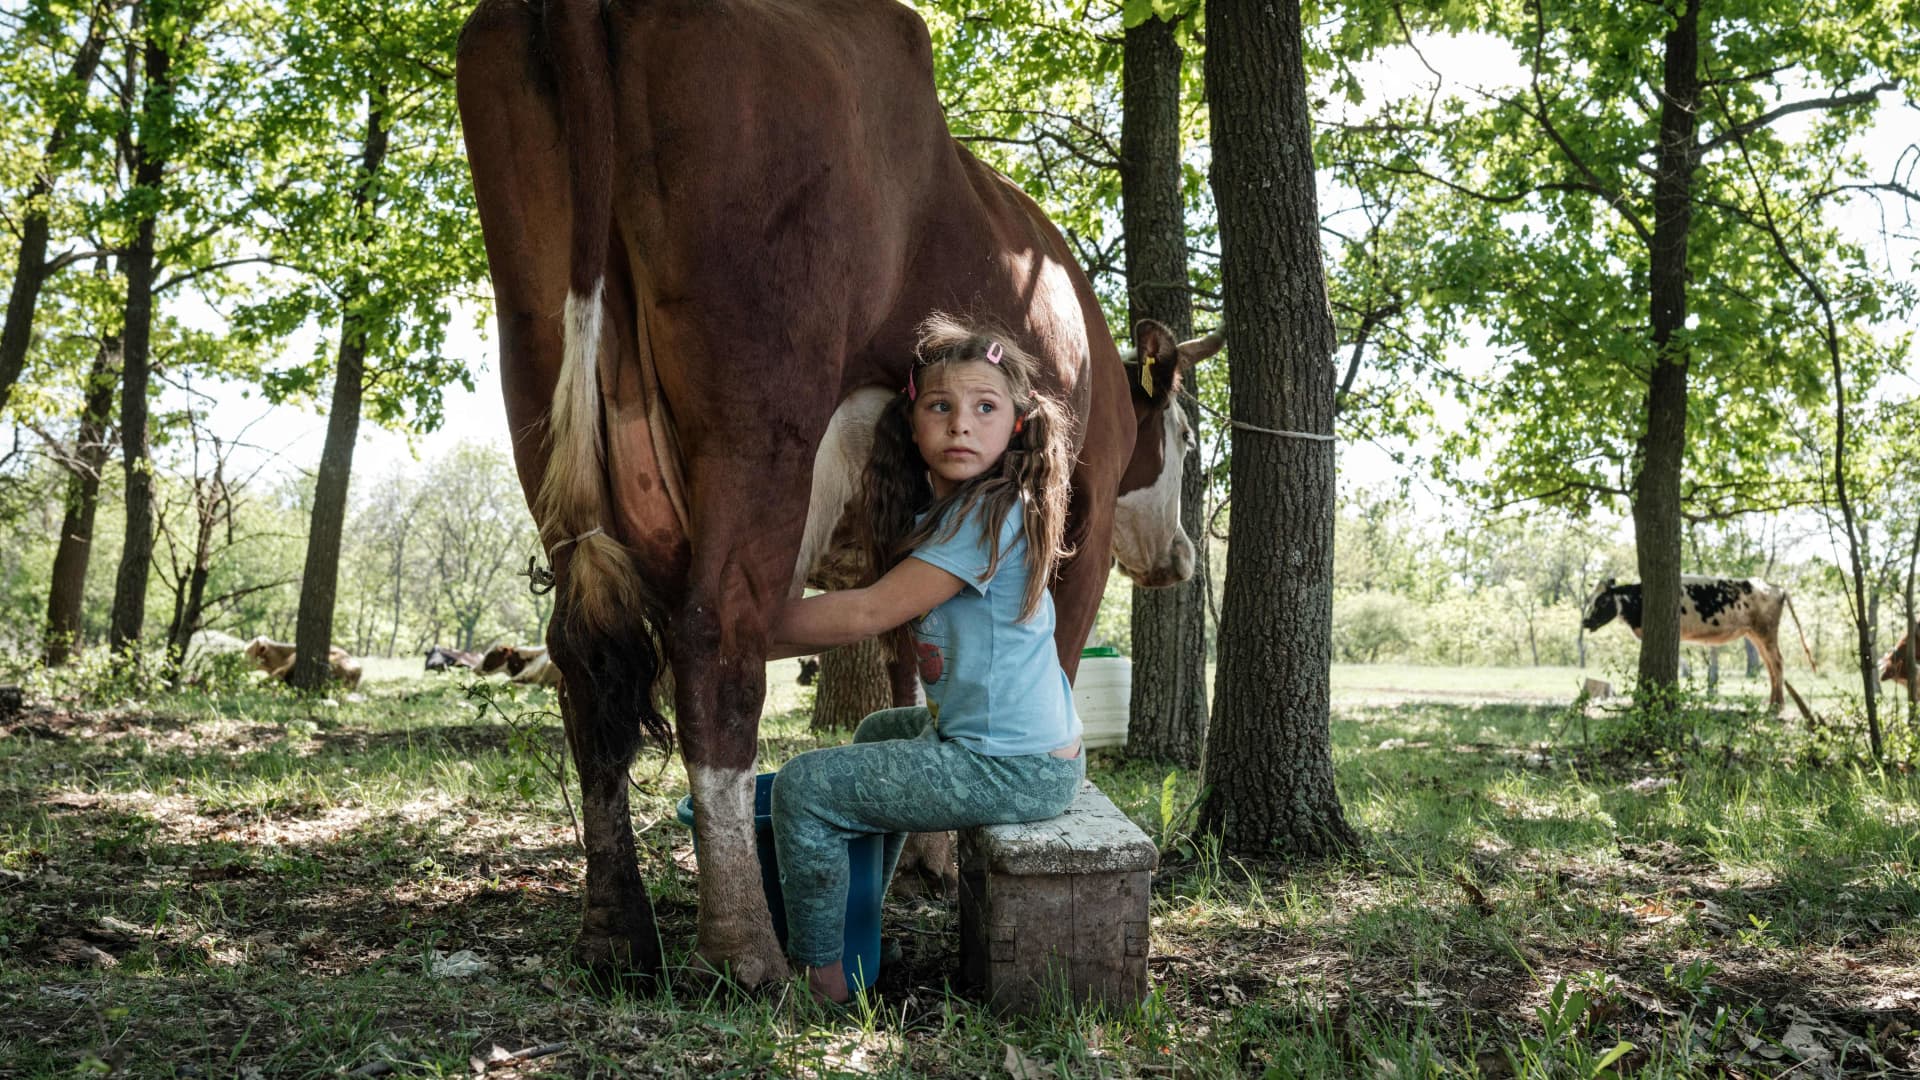 Veronika, 8, milks a cow, as her family does it every day despite the lack of customers due to the war in Bakhmut, eastern Ukraine, on May 12, 2022, amid the Russian invasion of Ukraine.